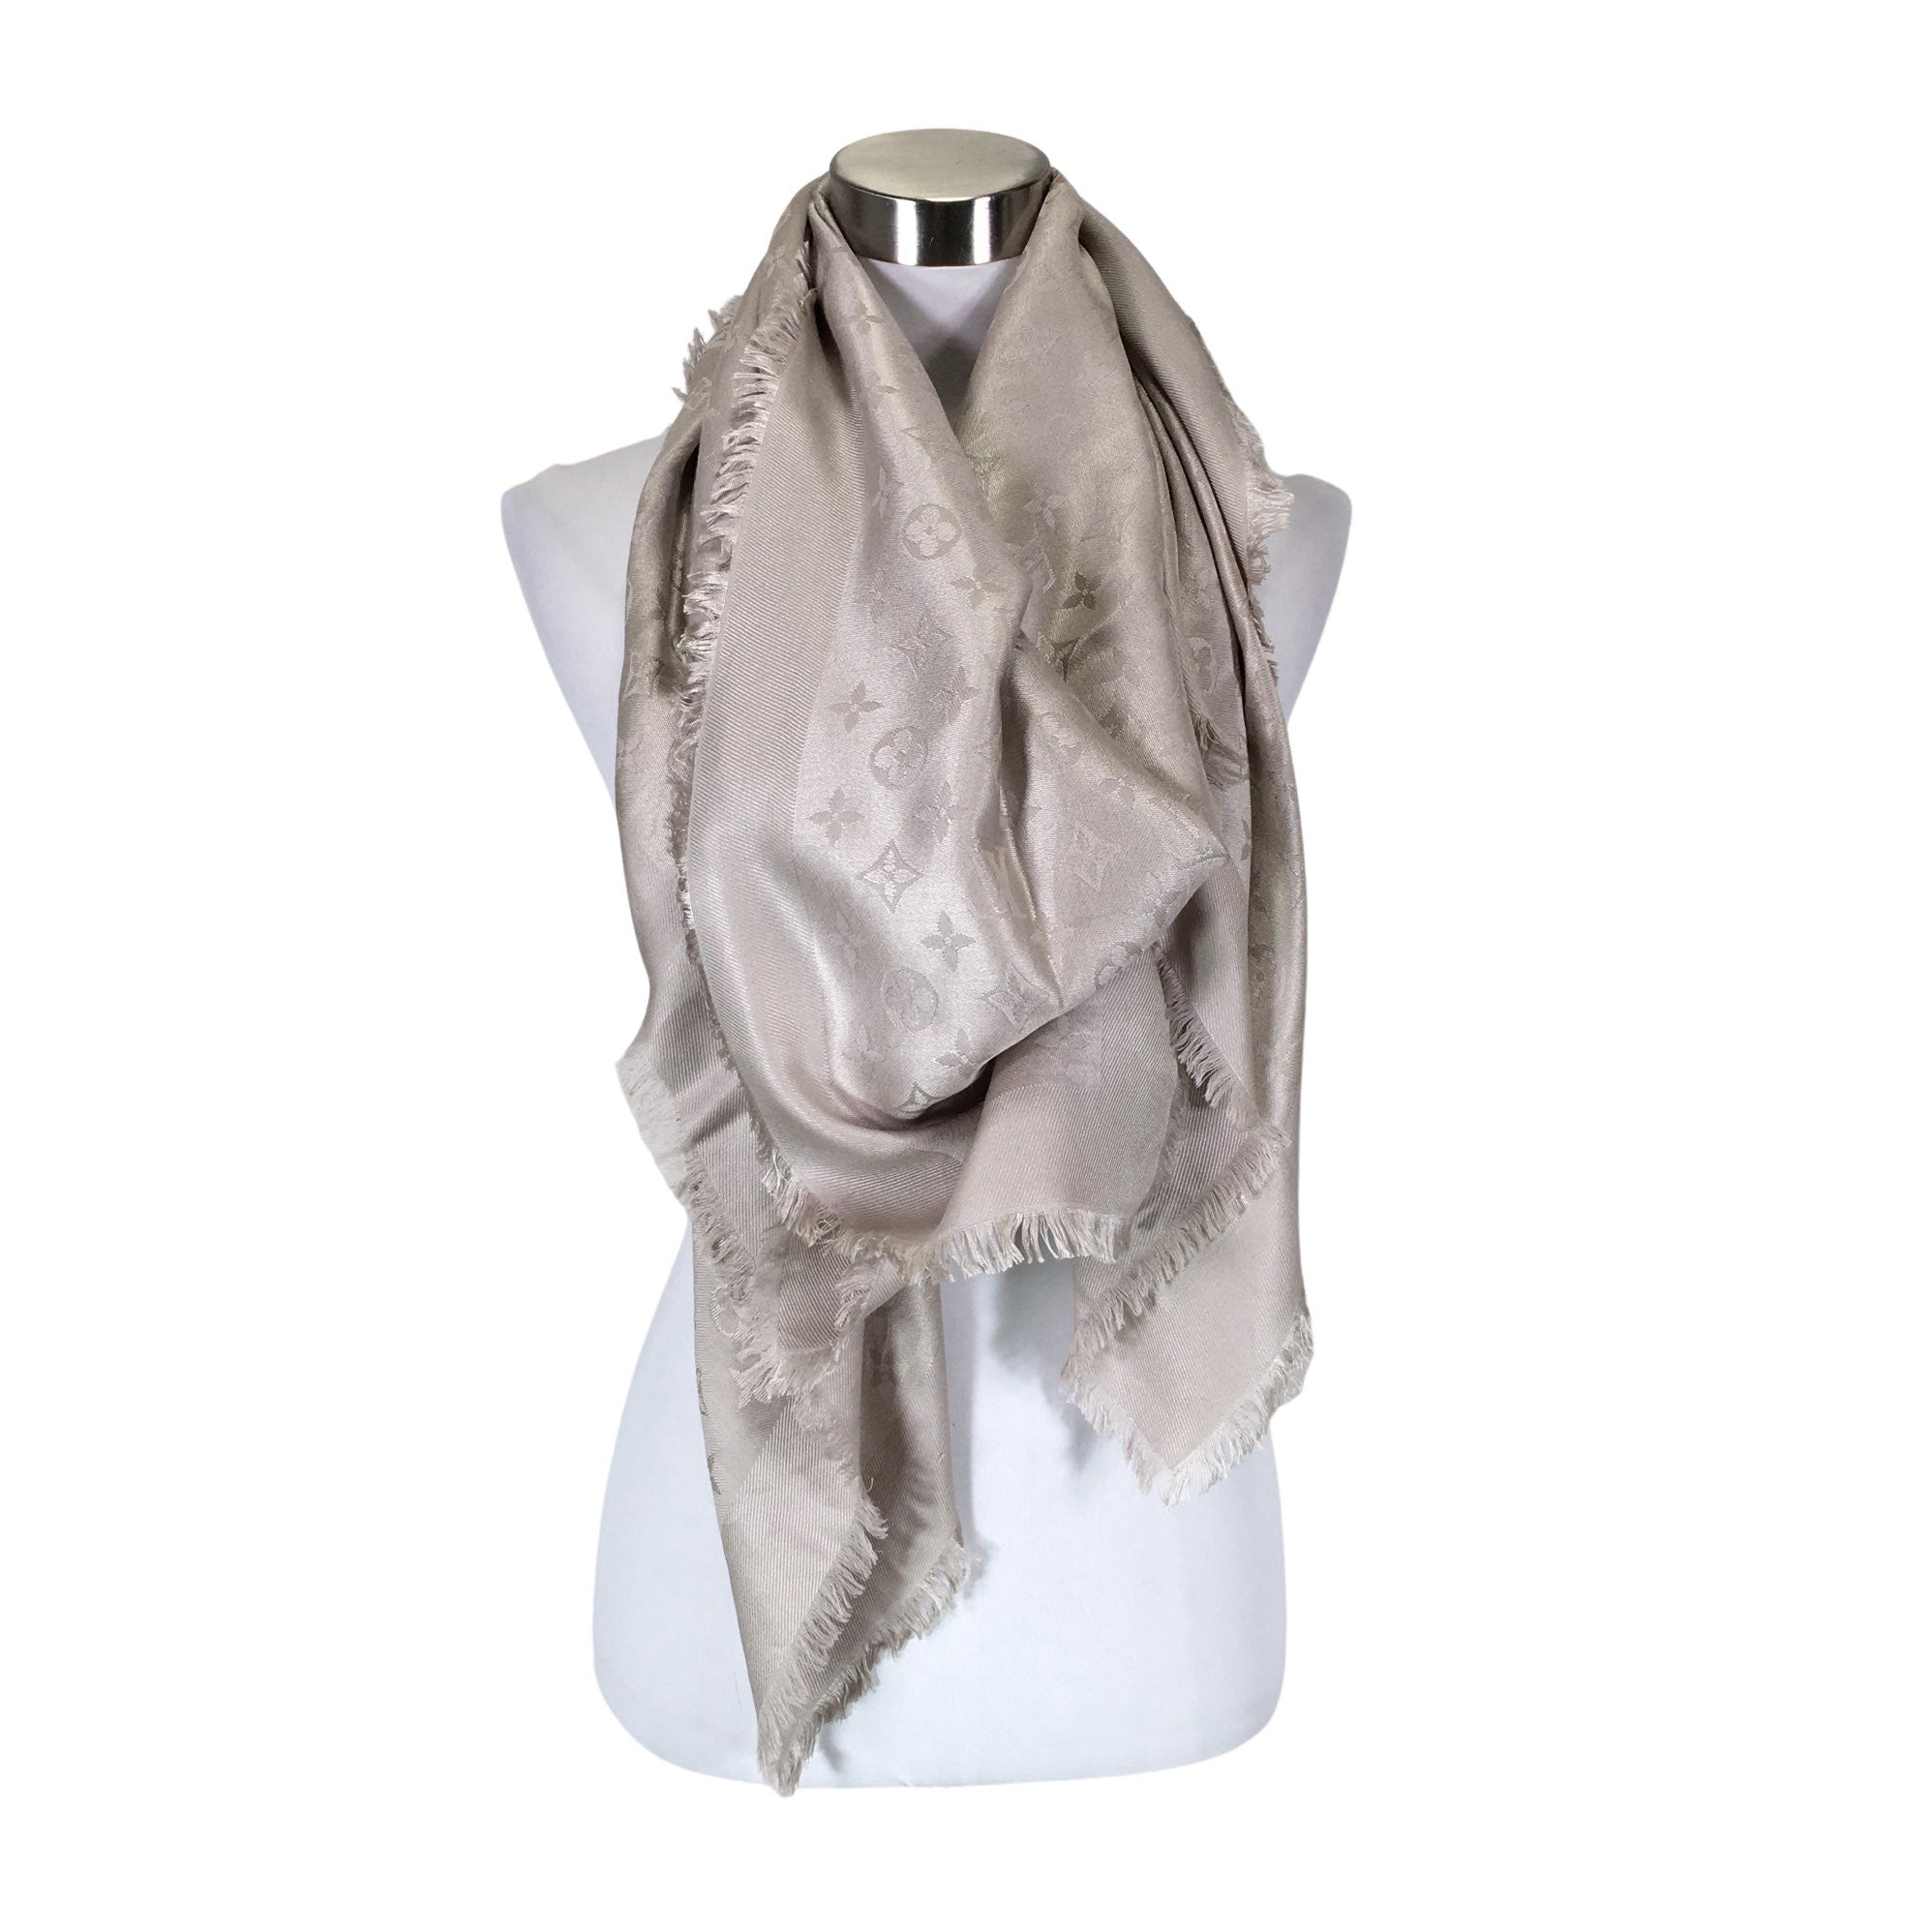 Louis Vuitton M78933 Ultimate Scarf , Beige, One Size